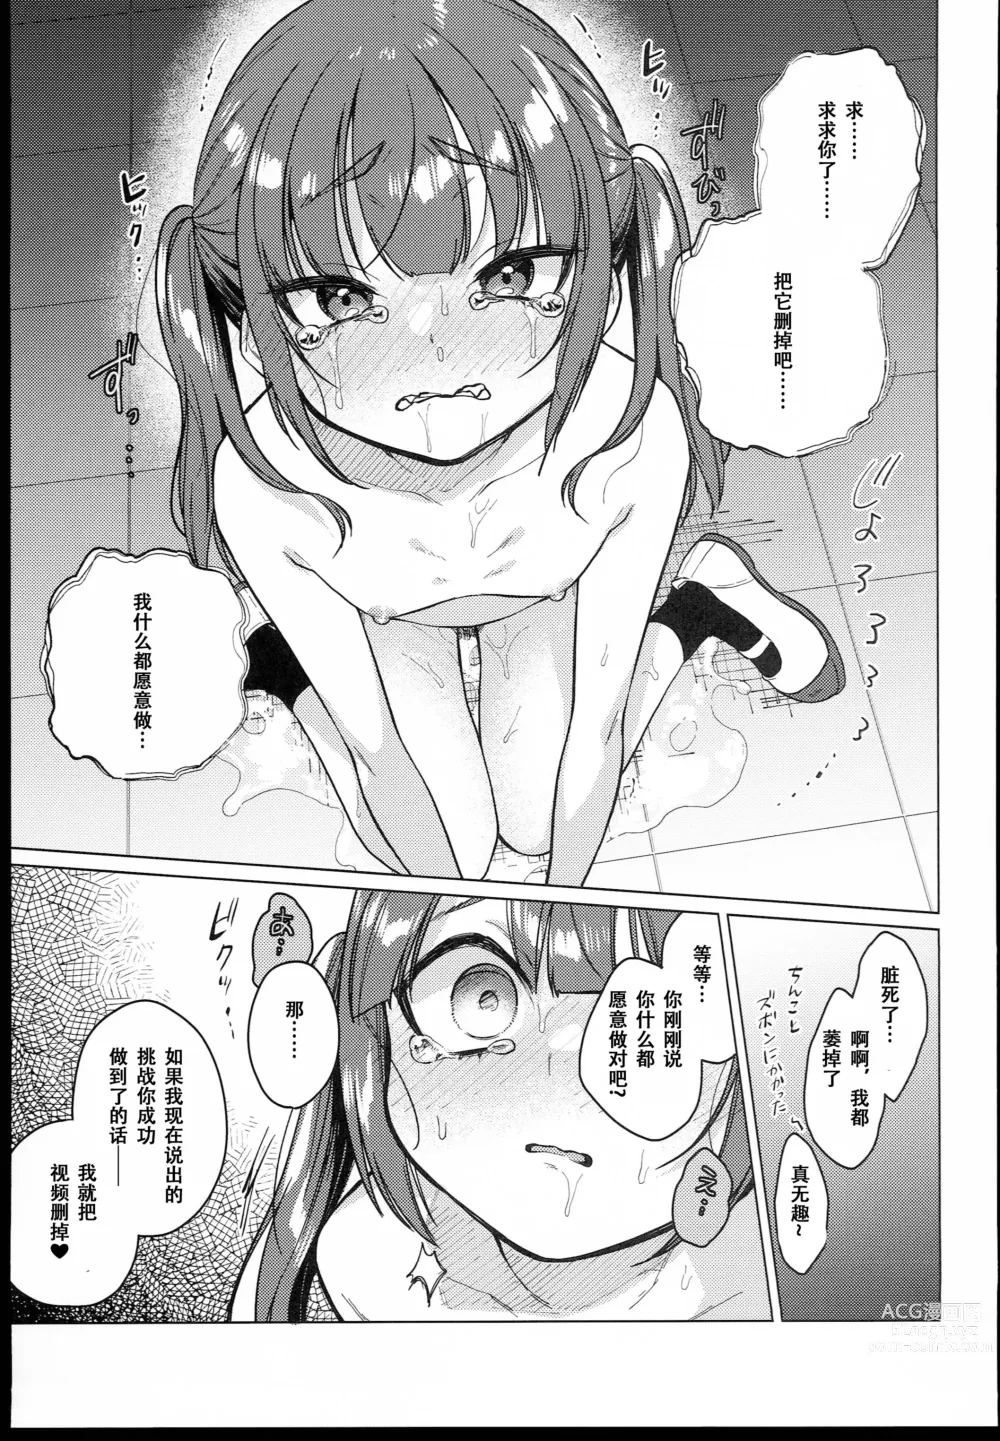 Page 7 of doujinshi 委員長は今日からみんなのオモチャ～終わった学校生活編～